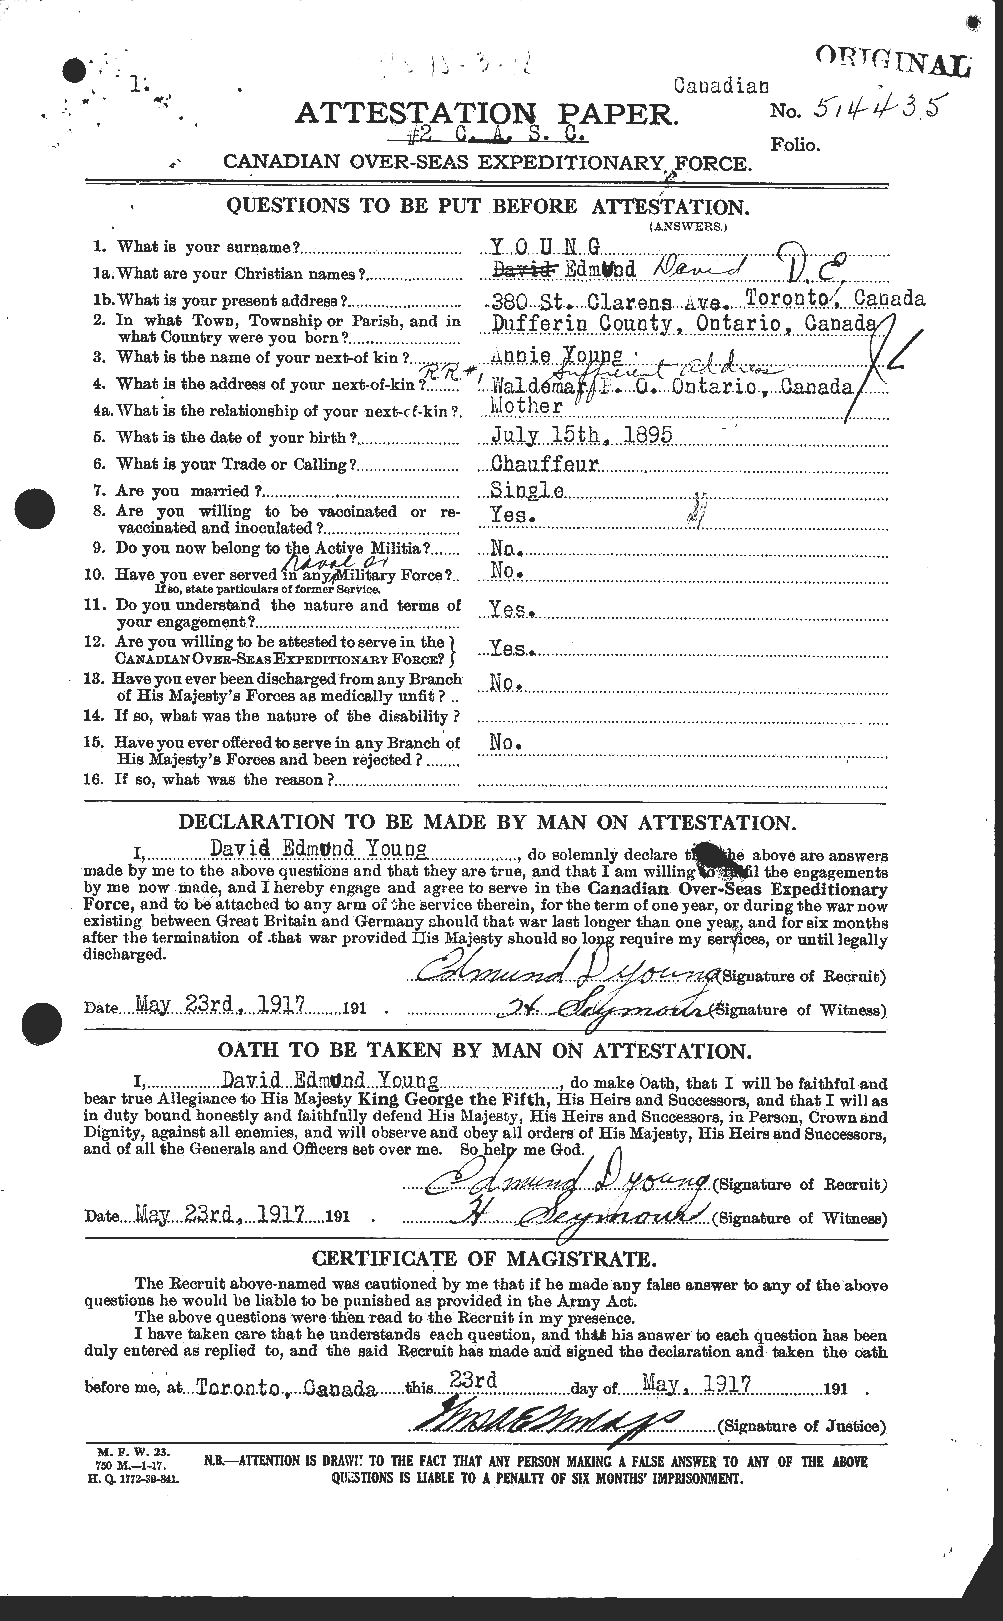 Personnel Records of the First World War - CEF 690229a